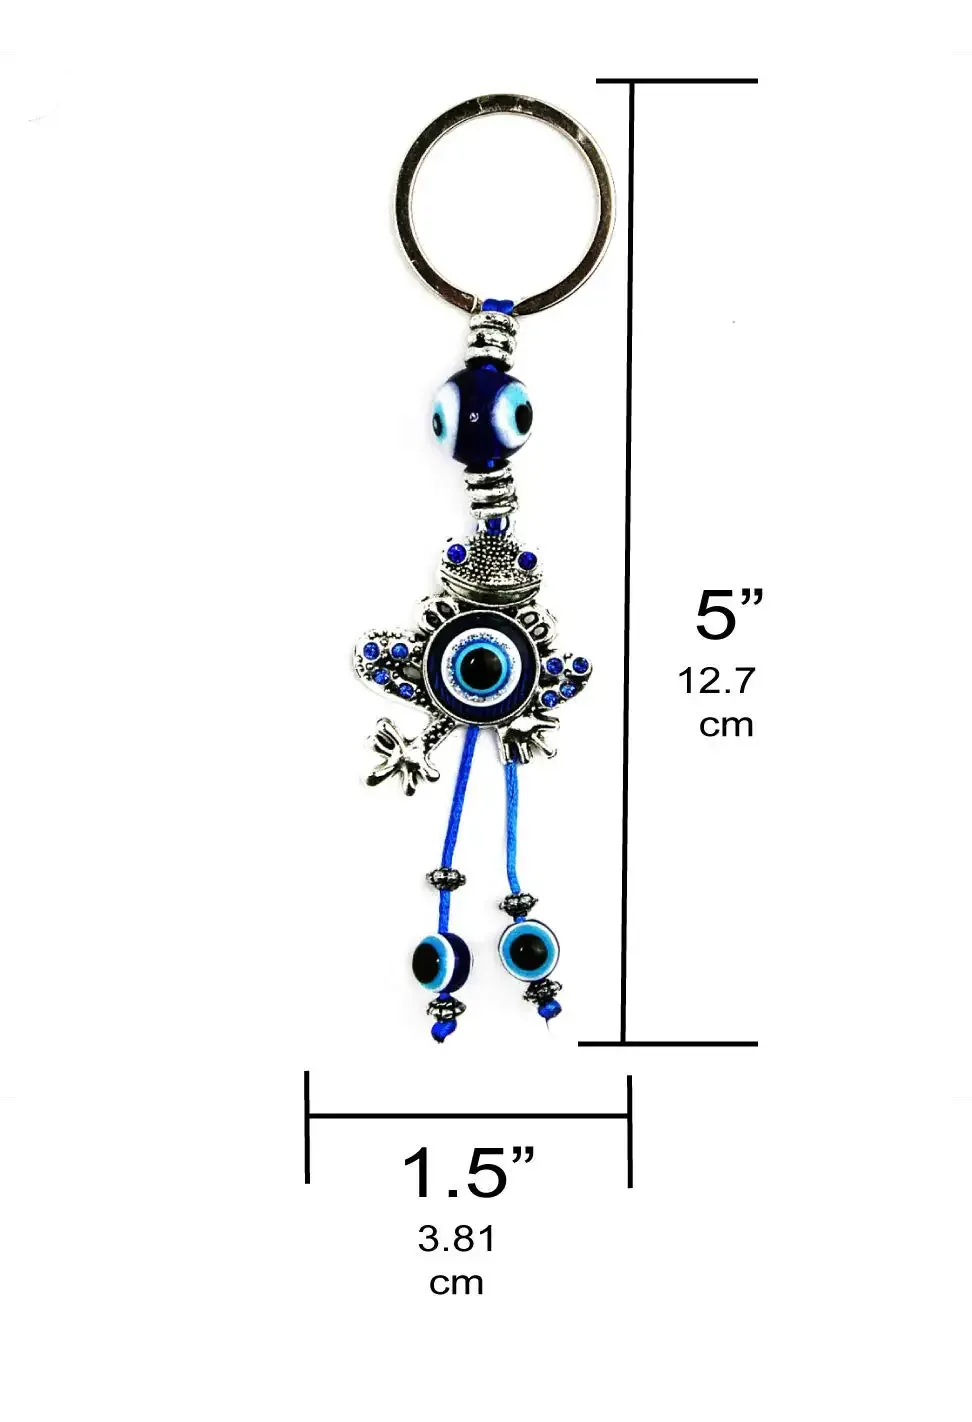 3ml luckboostium frog charm w/blue crystal evil eye keychain ring sign for protection blessing harmony and balance home bags car rear view mirror hanging accessories 1 5 x 5